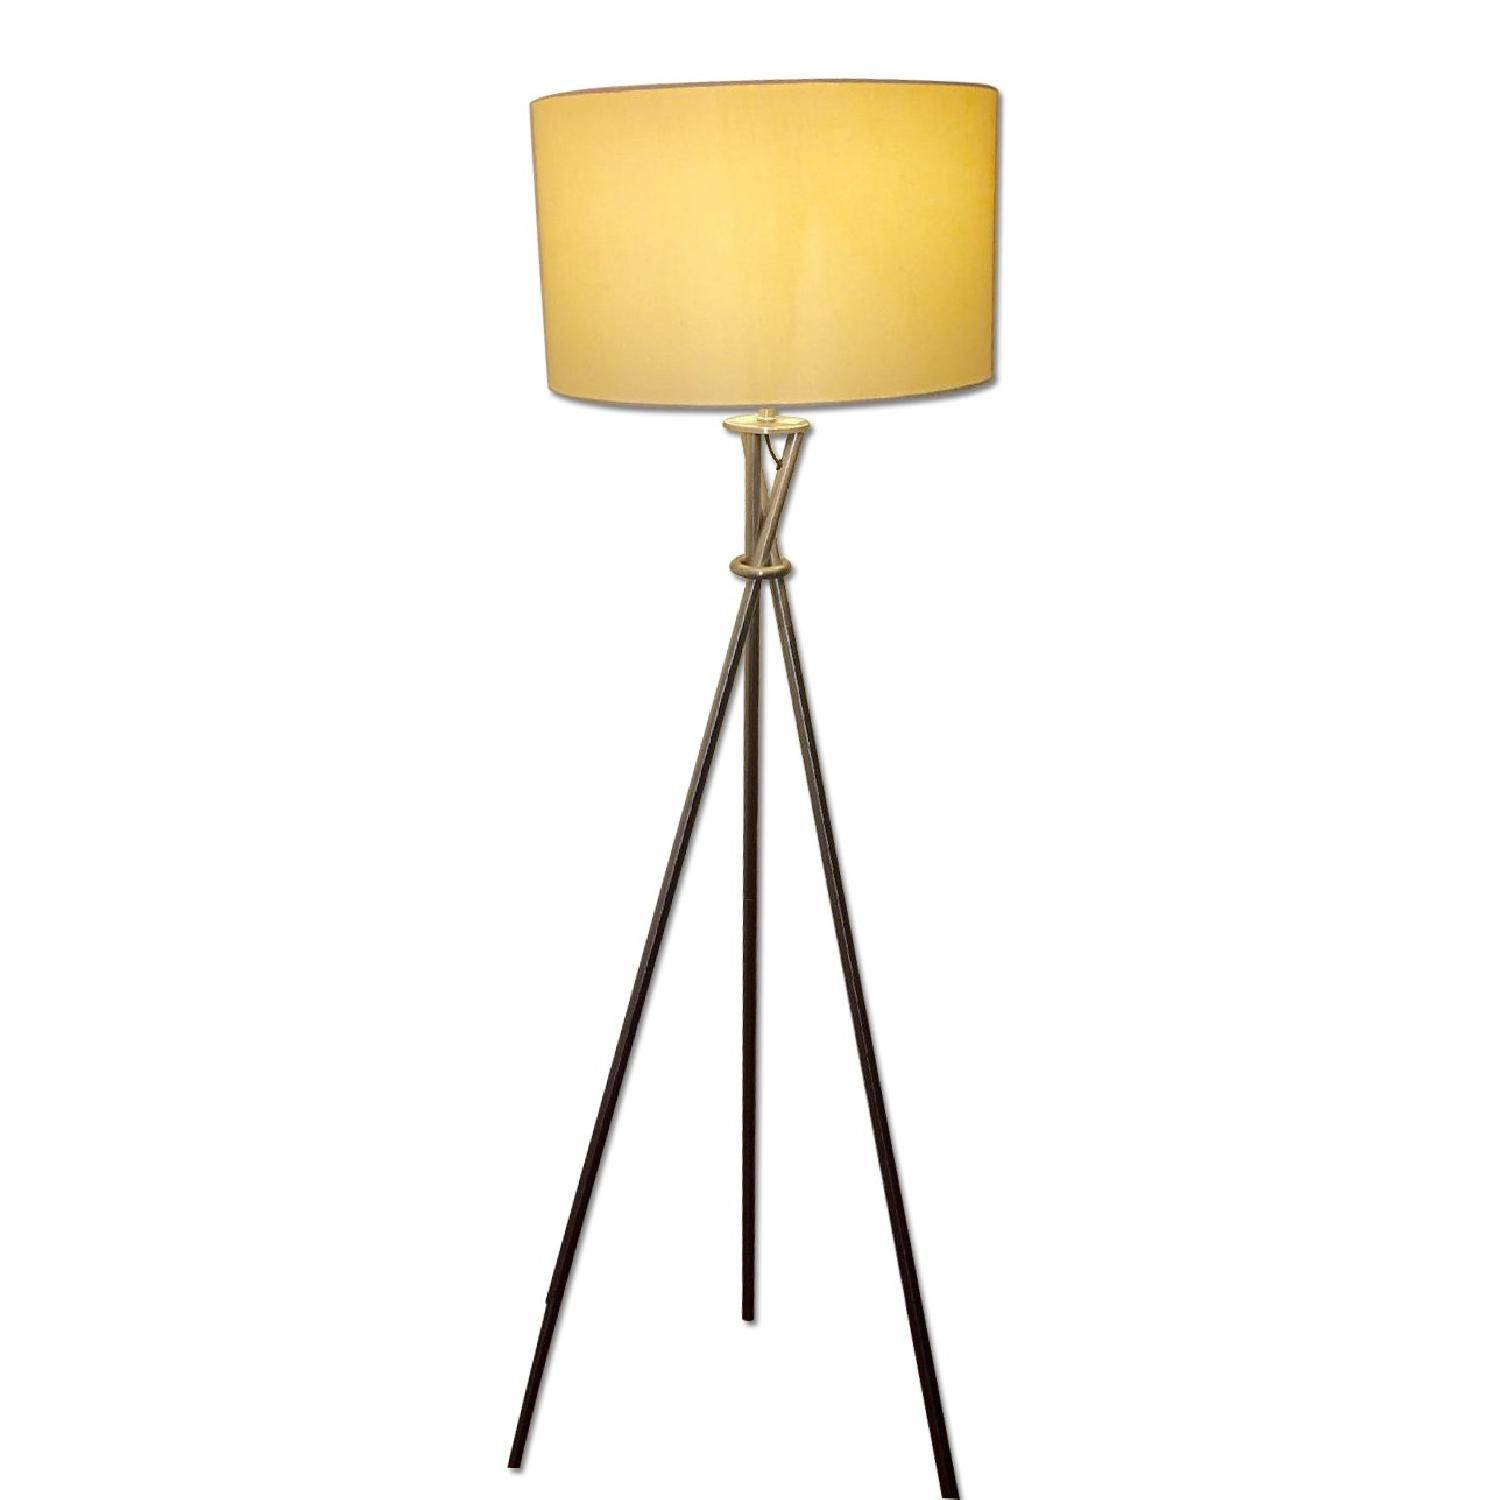 Hextra Tripod Floor Lamp In Brushed Nickel Decorate with regard to size 1500 X 1500